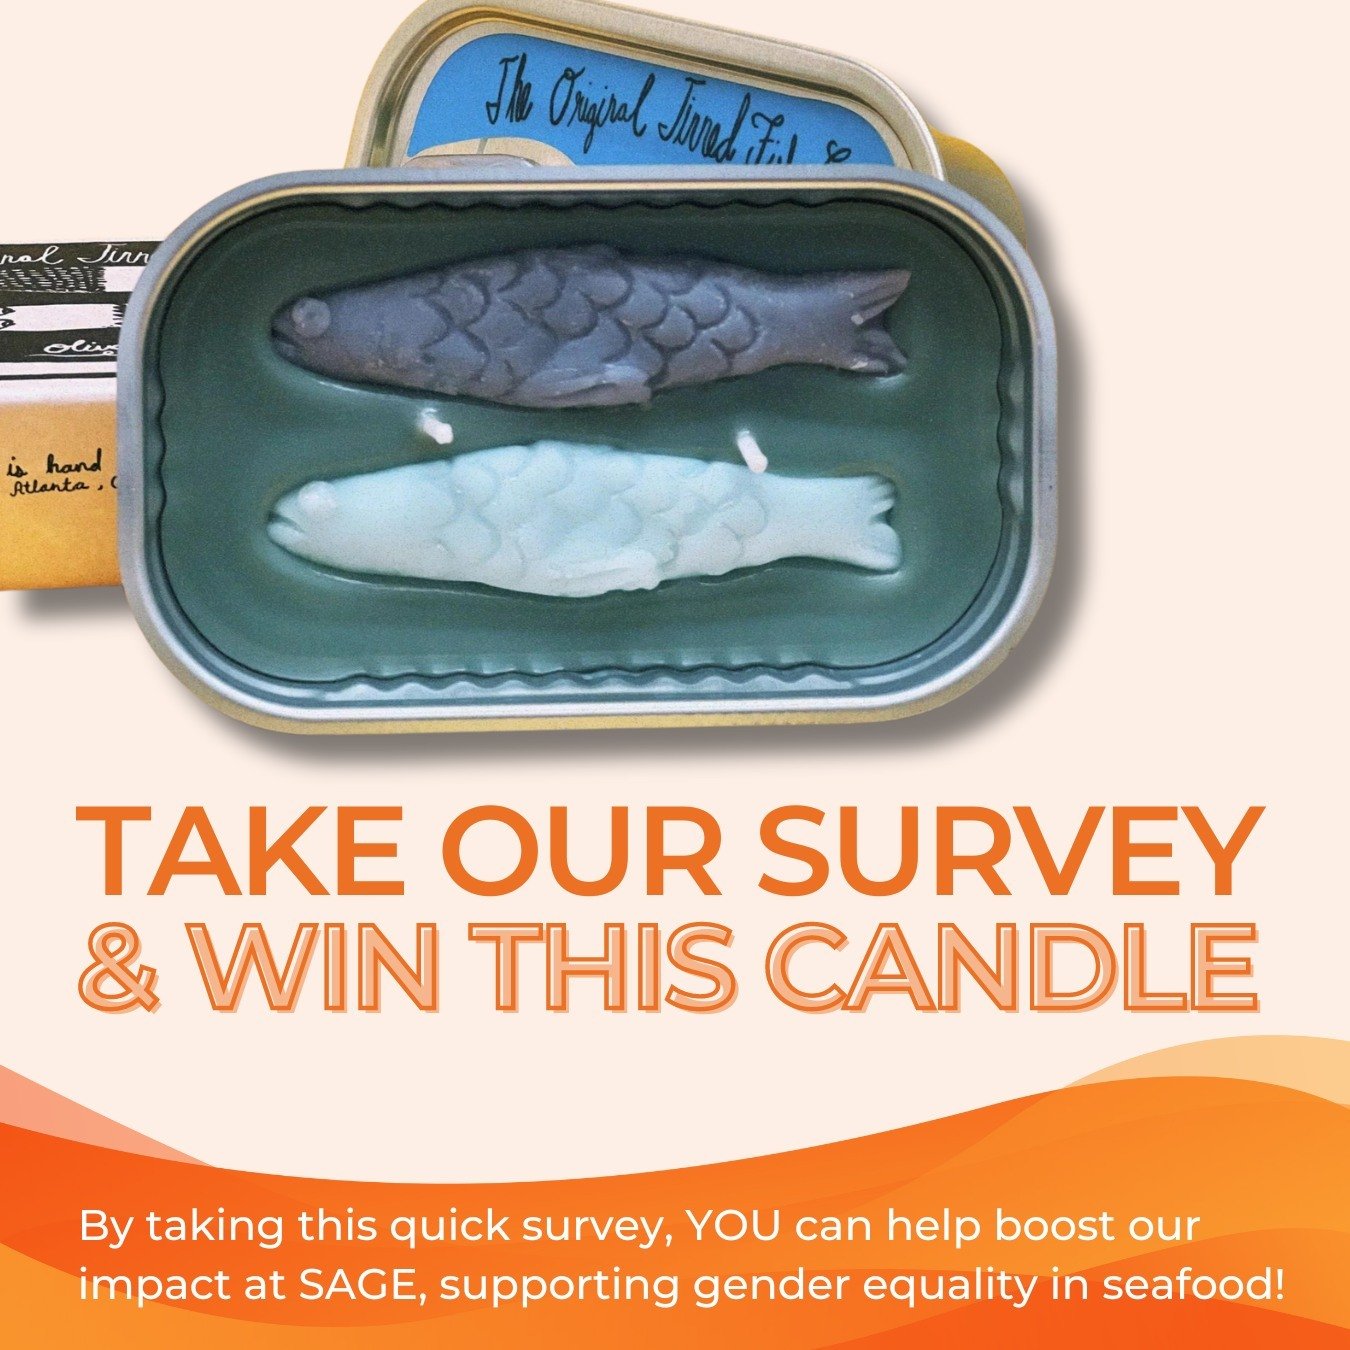 Help our team make an even BIGGER impact! ⁠
⁠
If you take our 5-minute survey, you&rsquo;ll contribute to a more inclusive seafood sector built for EVERYONE and you&rsquo;ll be entered to ✨win✨ this fun Tinned Fish candle. 🕯️⁠
⁠
We&rsquo;ll randomly